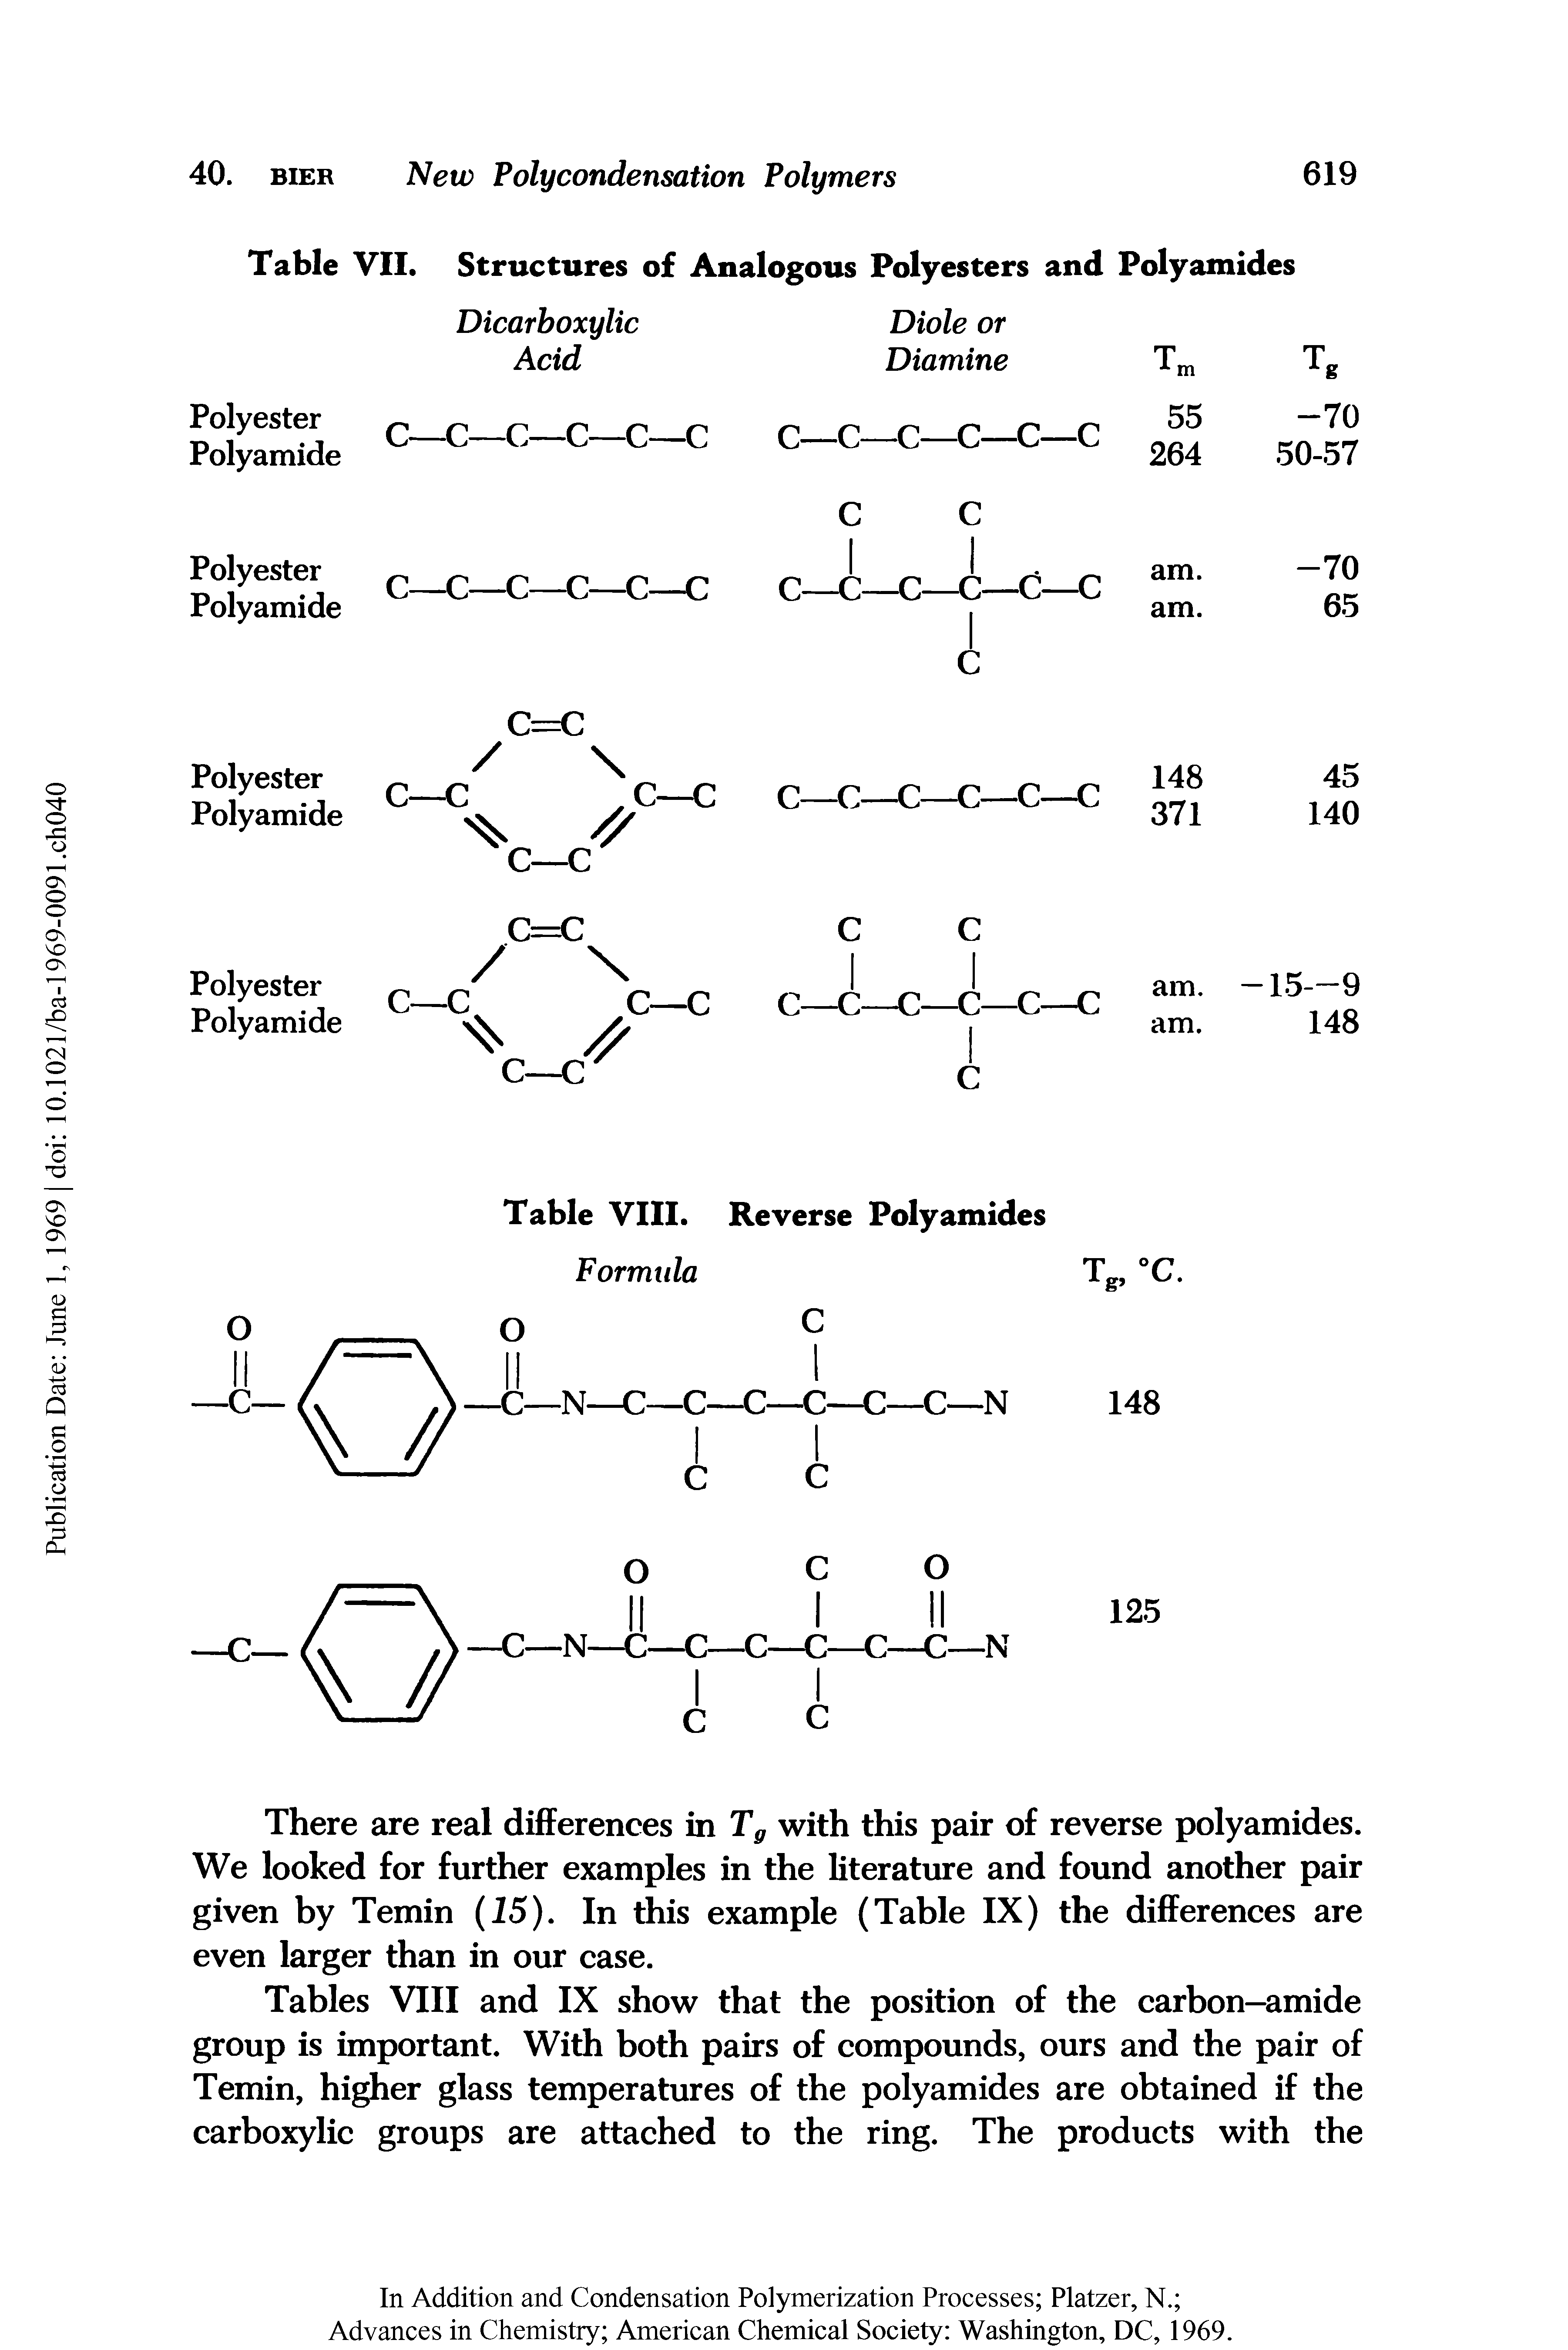 Tables VIII and IX show that the position of the carbon-amide group is important. With both pairs of compounds, ours and the pair of Temin, higher glass temperatures of the polyamides are obtained if the carboxylic groups are attached to the ring. The products with the...